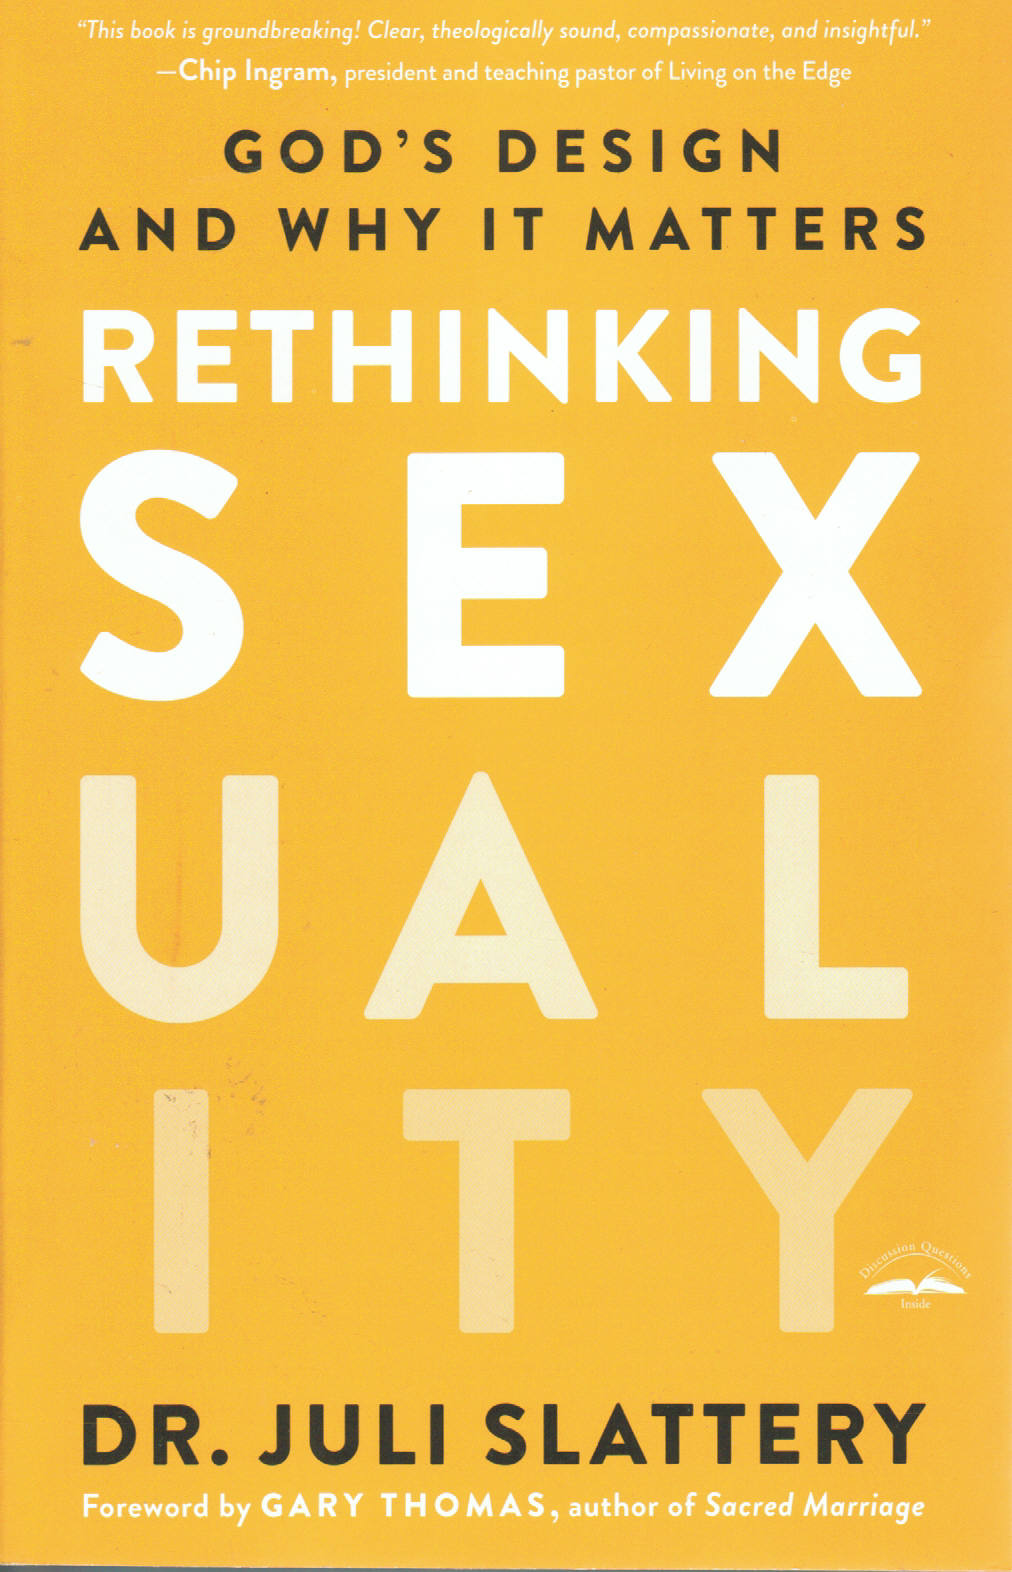 Rethinking Sexuality: God's Design and Why it Matters